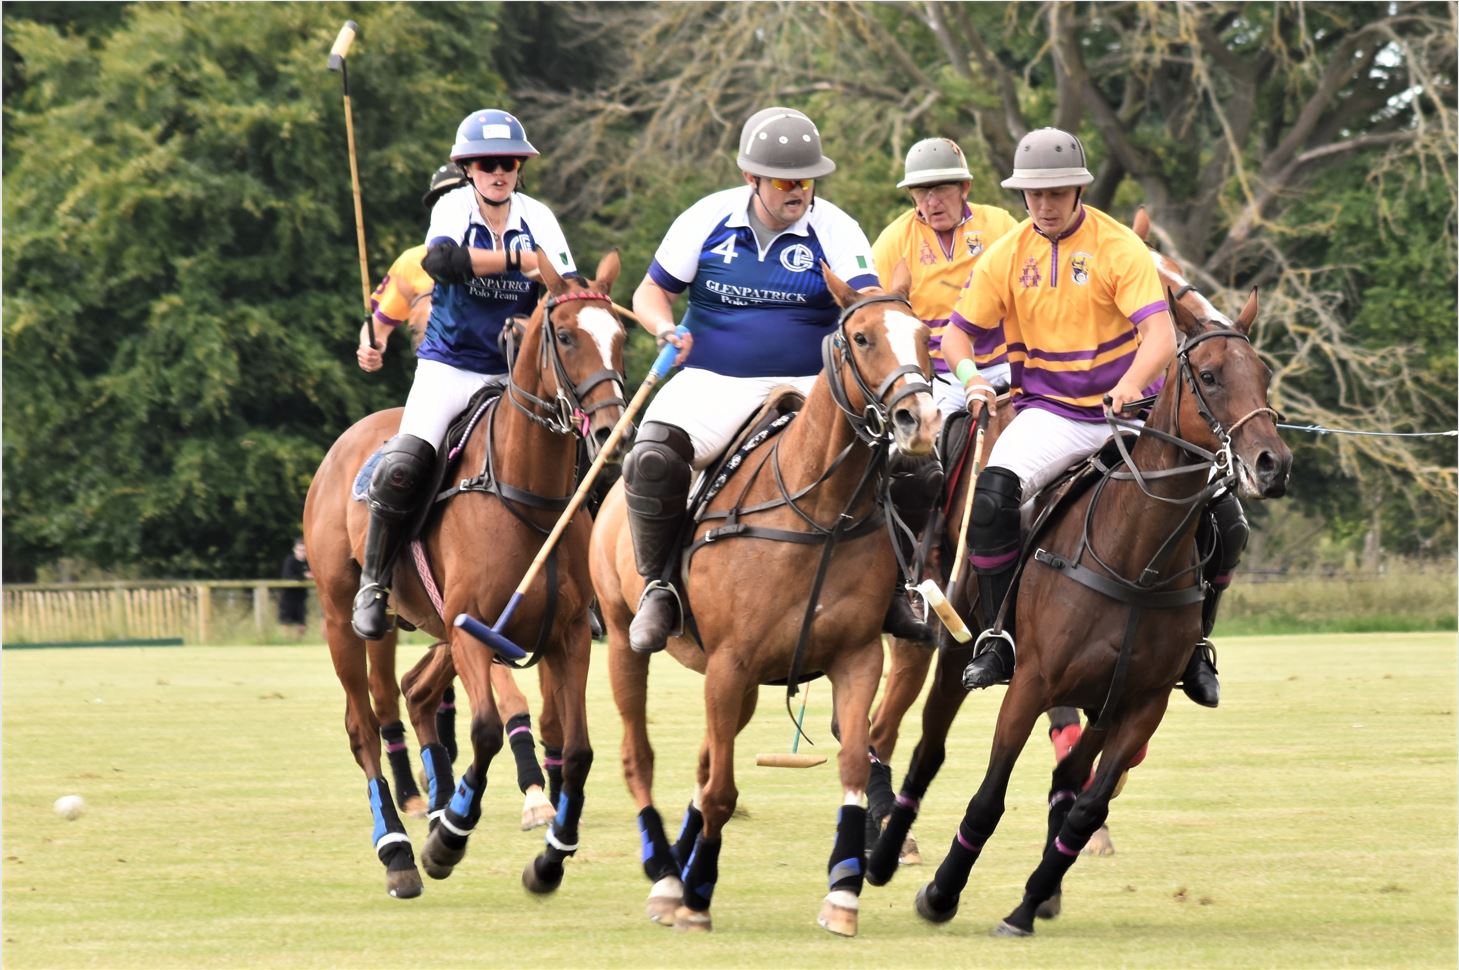 Derby Tournament paves the way to new energy in the game of Irish polo